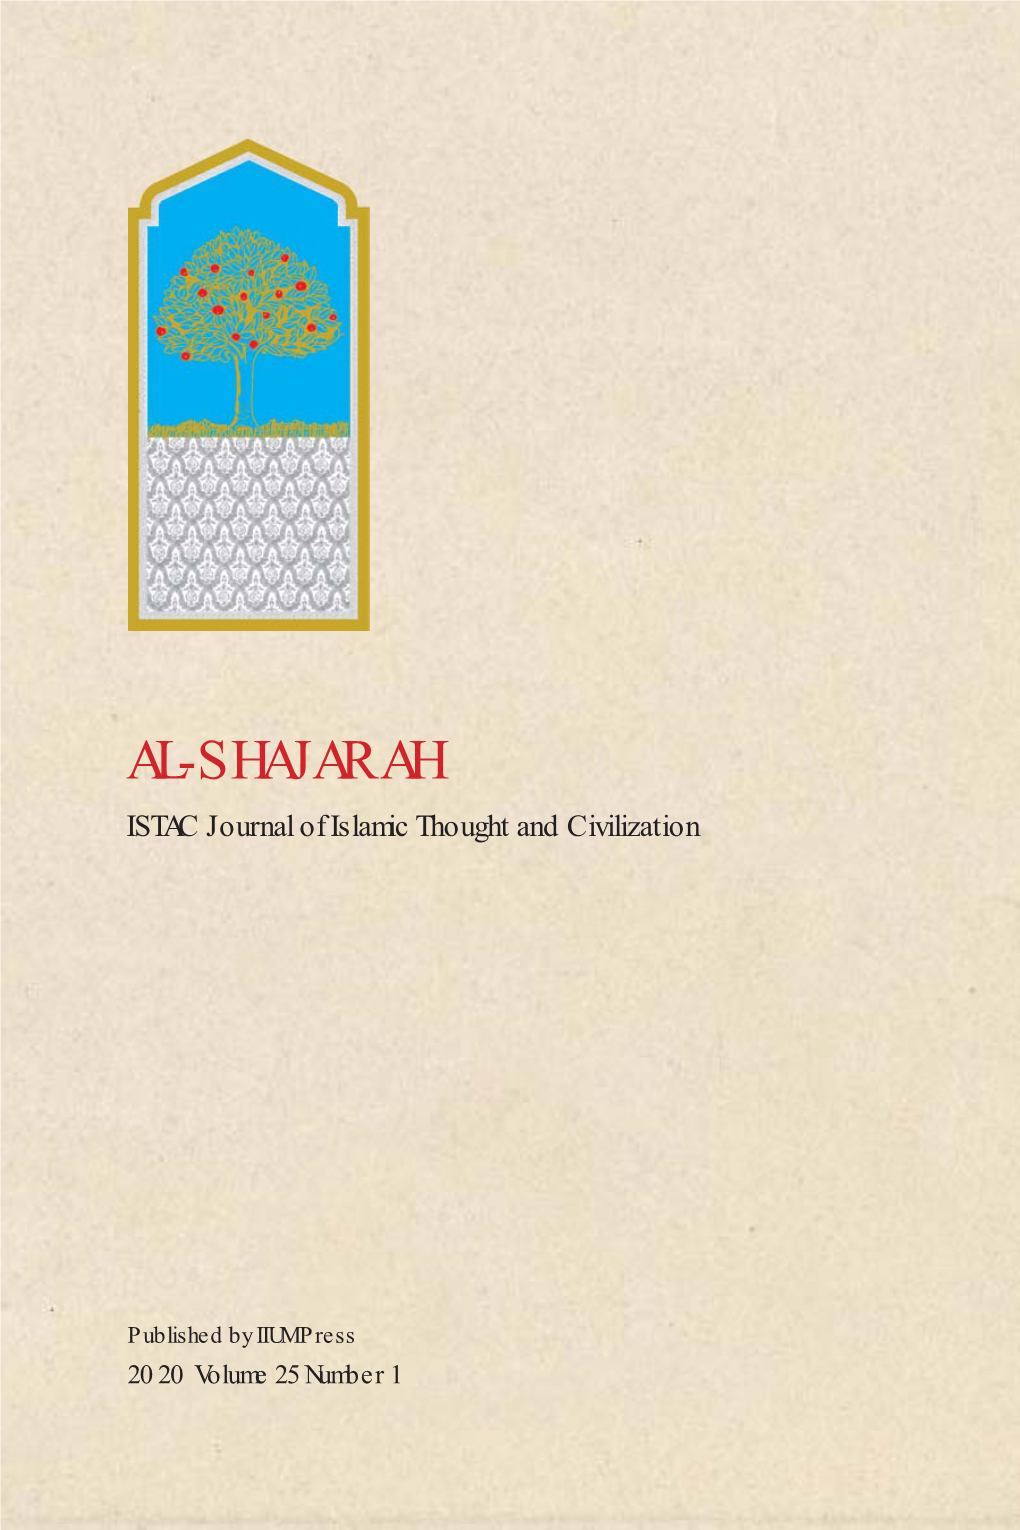 AL-SHAJARAH ISTAC Journal of Islamic Thought and Civilization